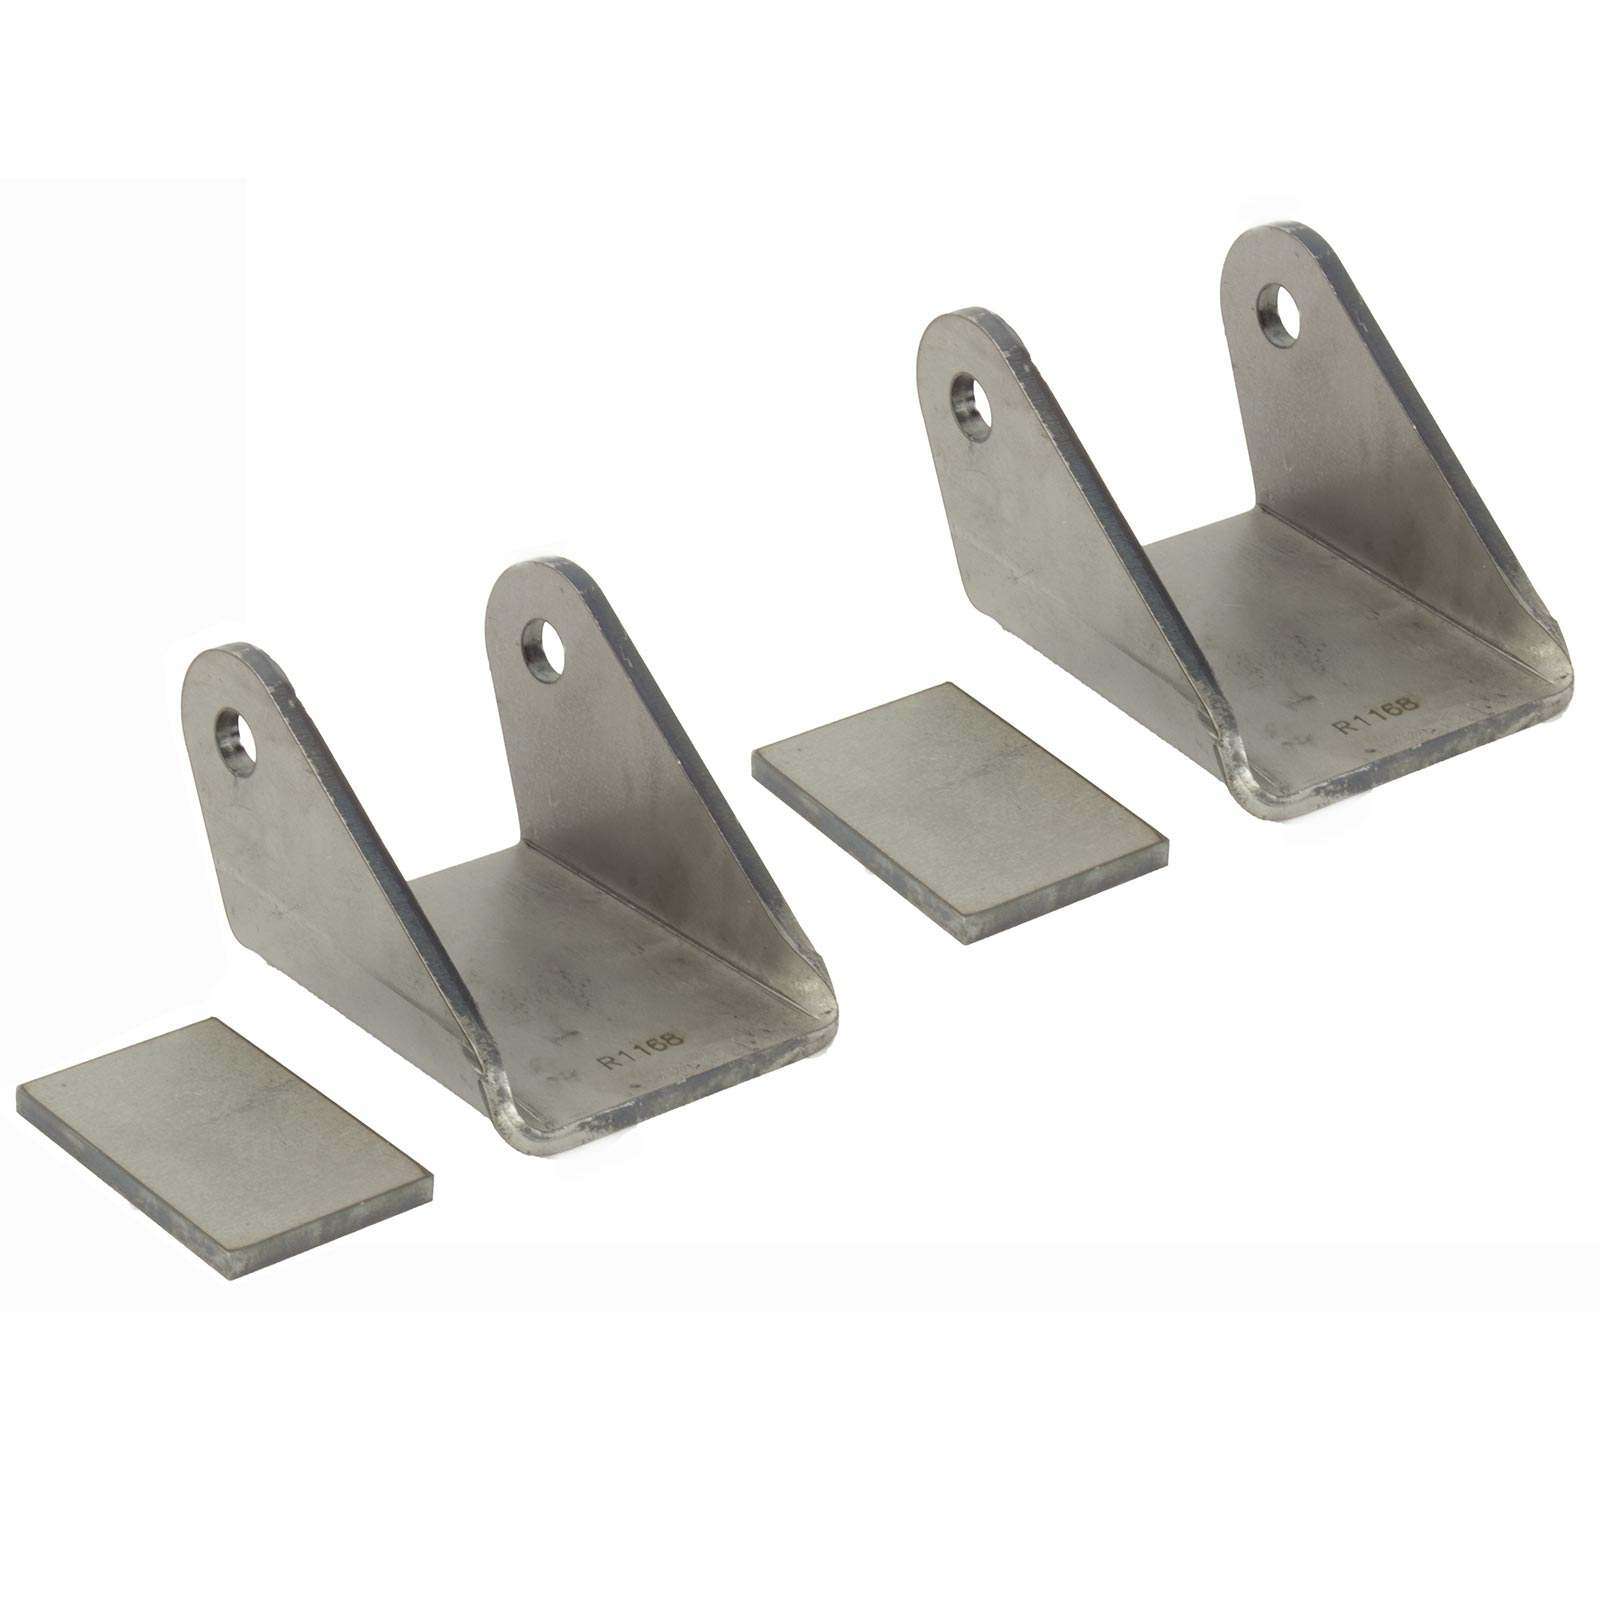 HEAVY DUTY FLUSH MOUNT SHACKLE HANGER PAIR 3 1/2 INCH OVERALL WIDTH FOR 3 INCH WIDE SPRINGS 